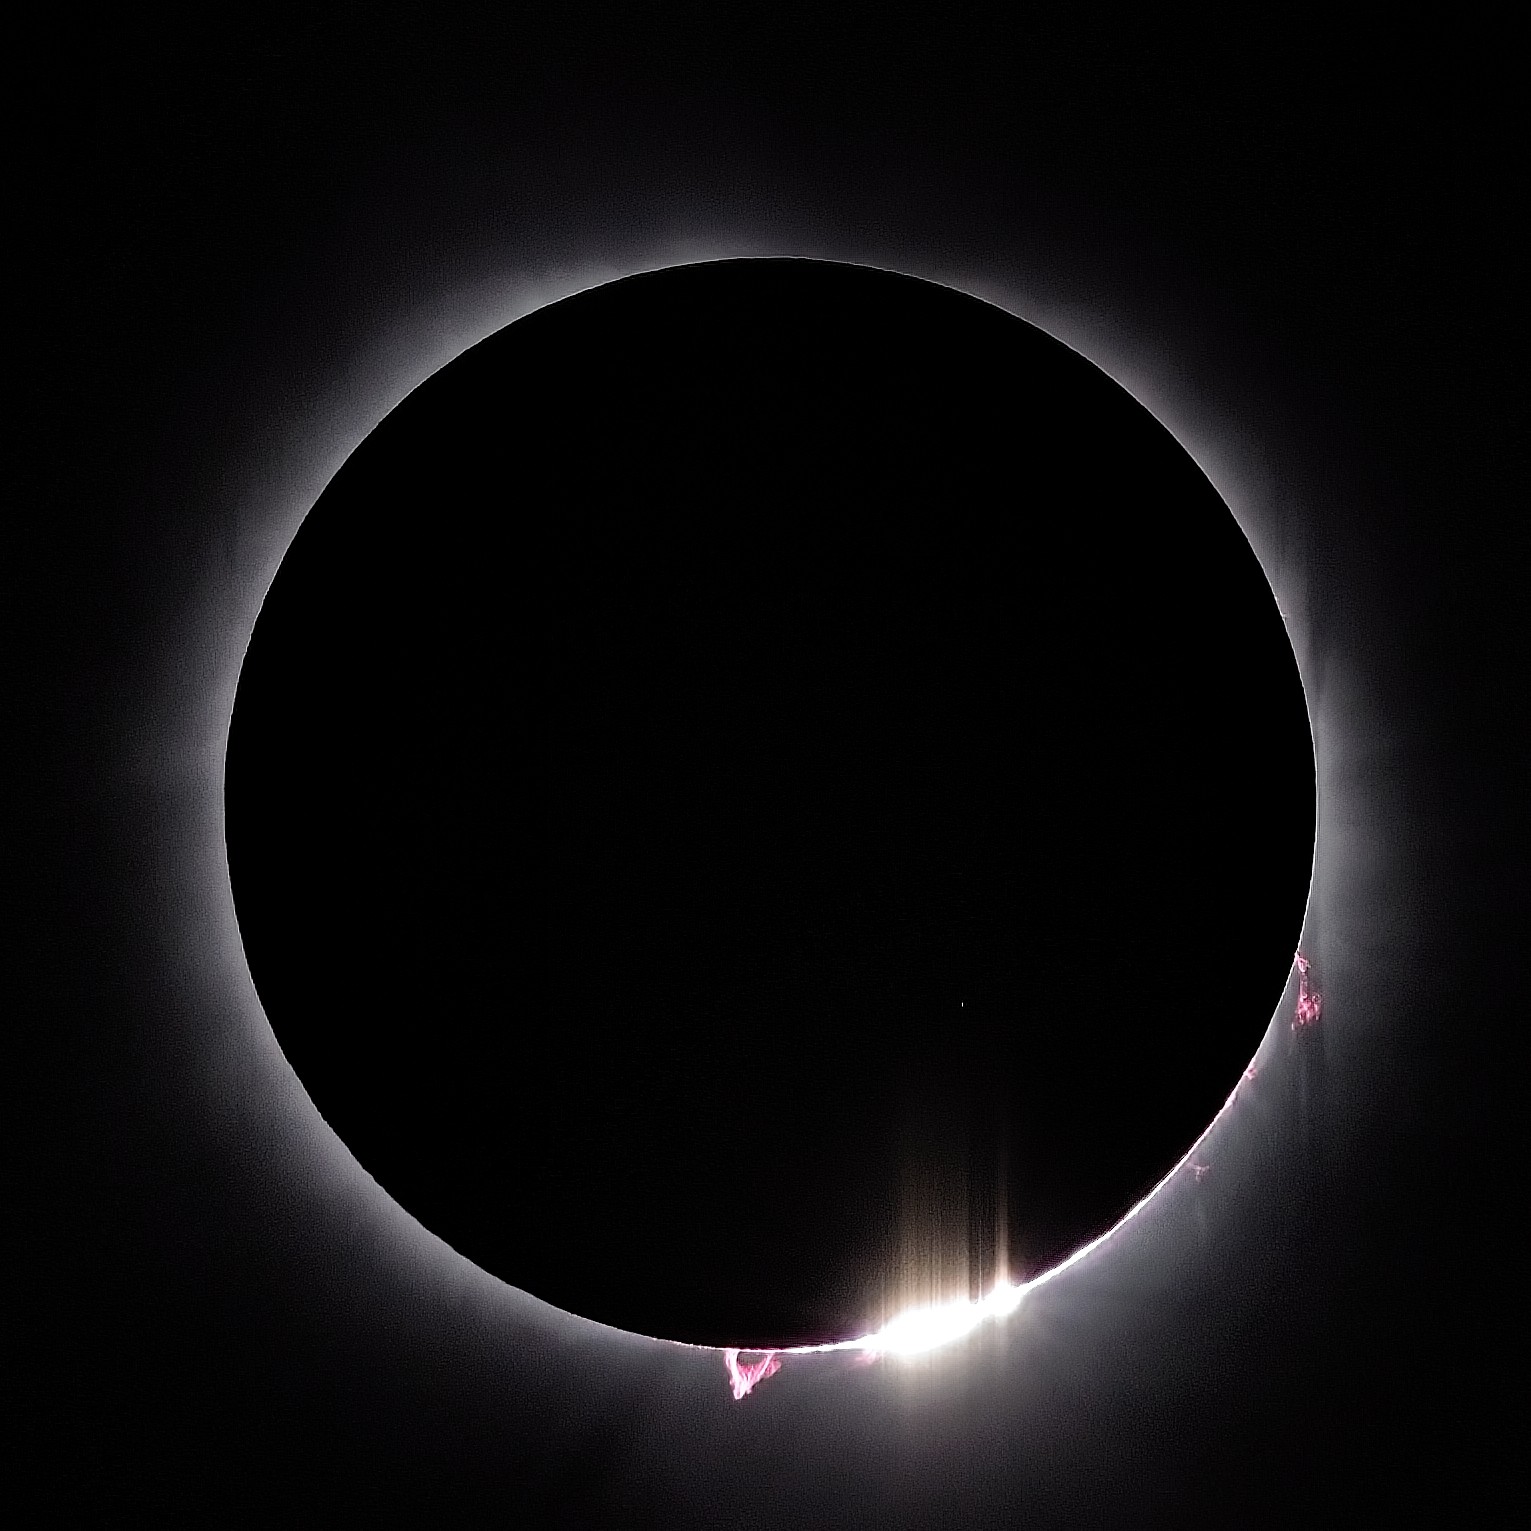 Diamond with large loop prominence